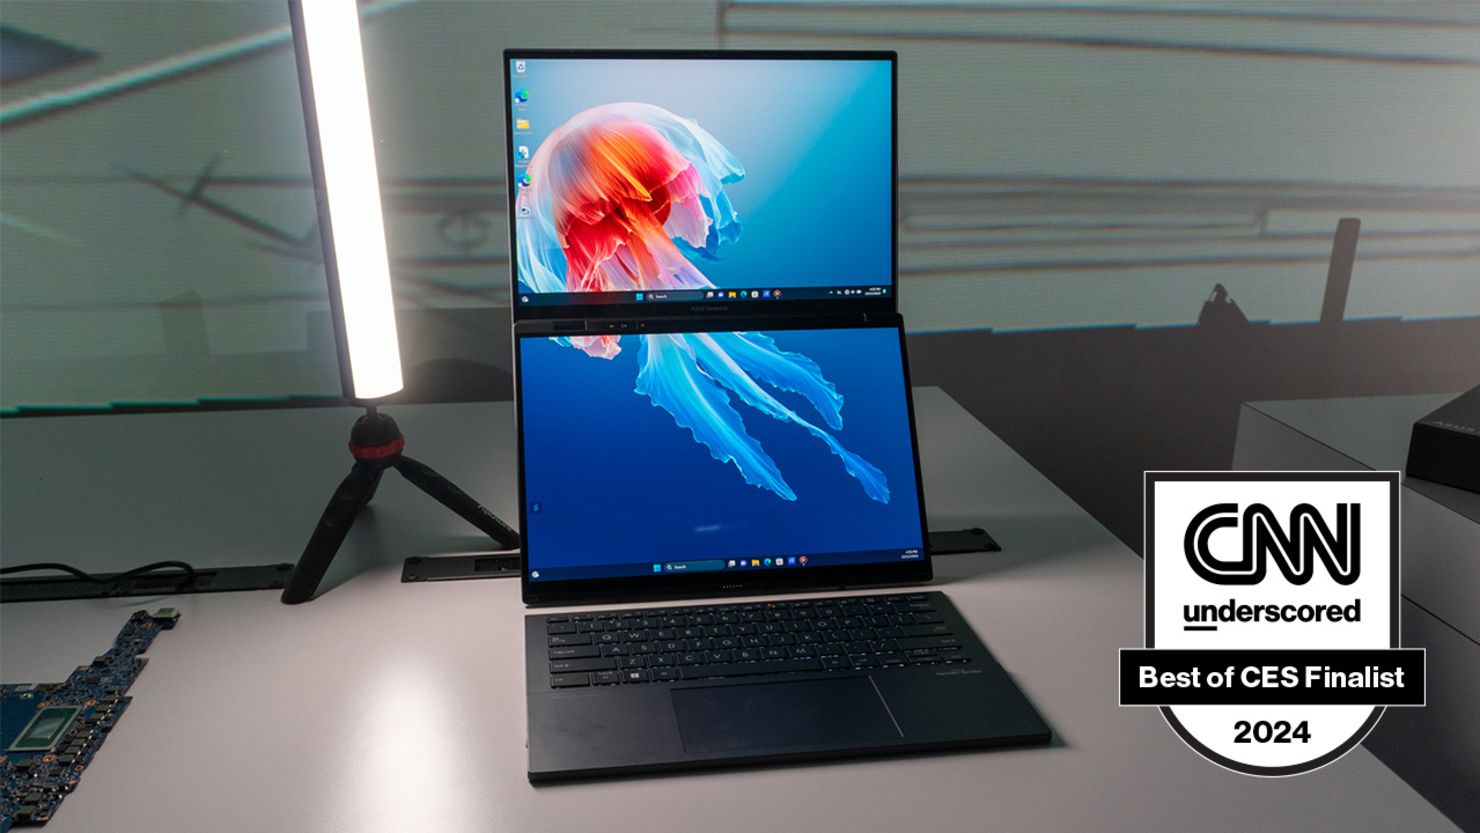 The ASUS Zenbook Duo is a dual screen laptop with two OLED displays